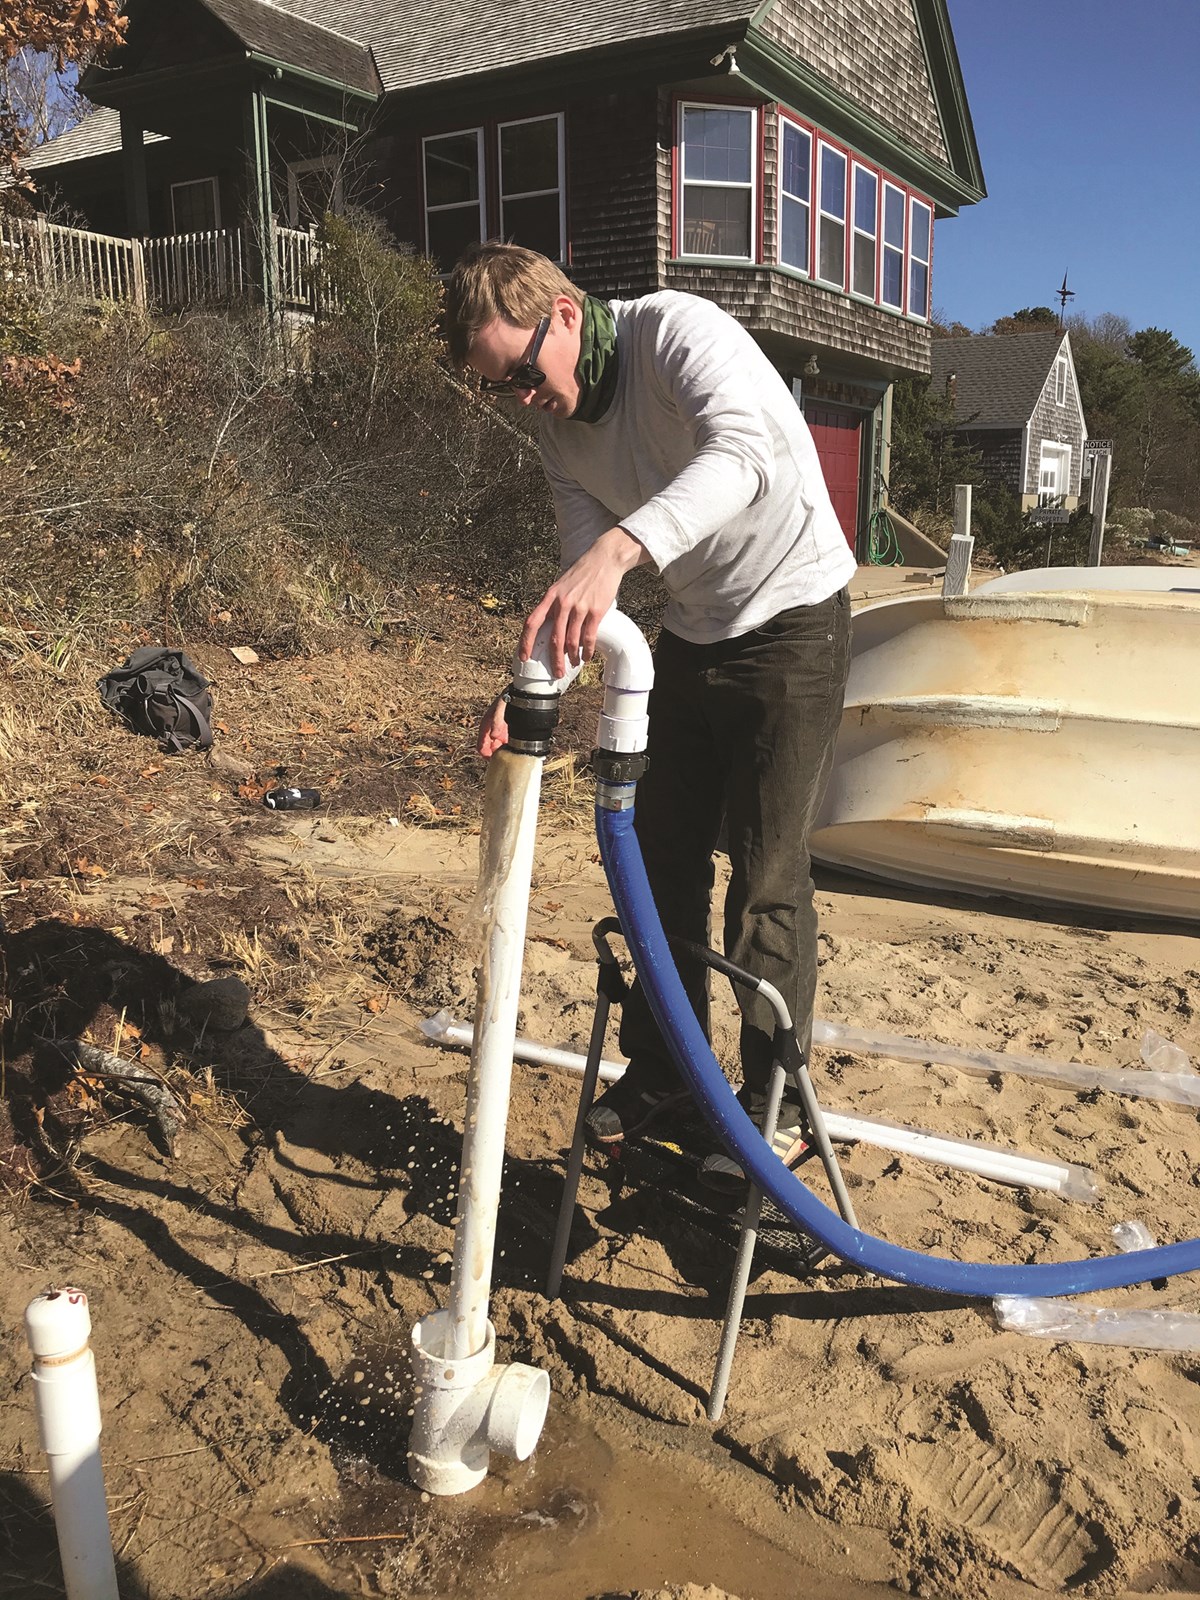 James Heiss digs a well at the beach